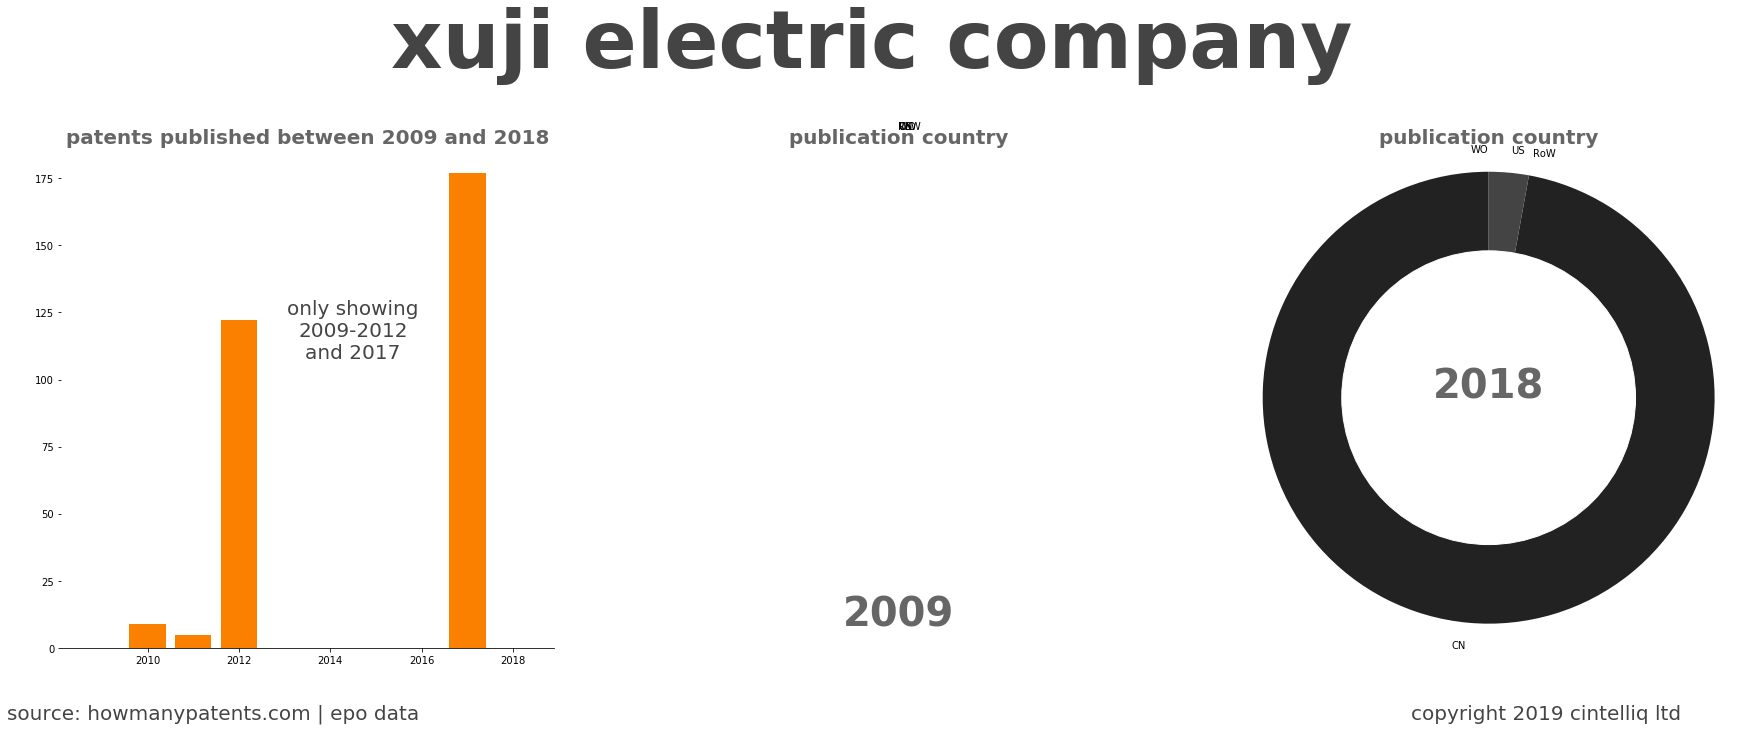 summary of patents for Xuji Electric Company